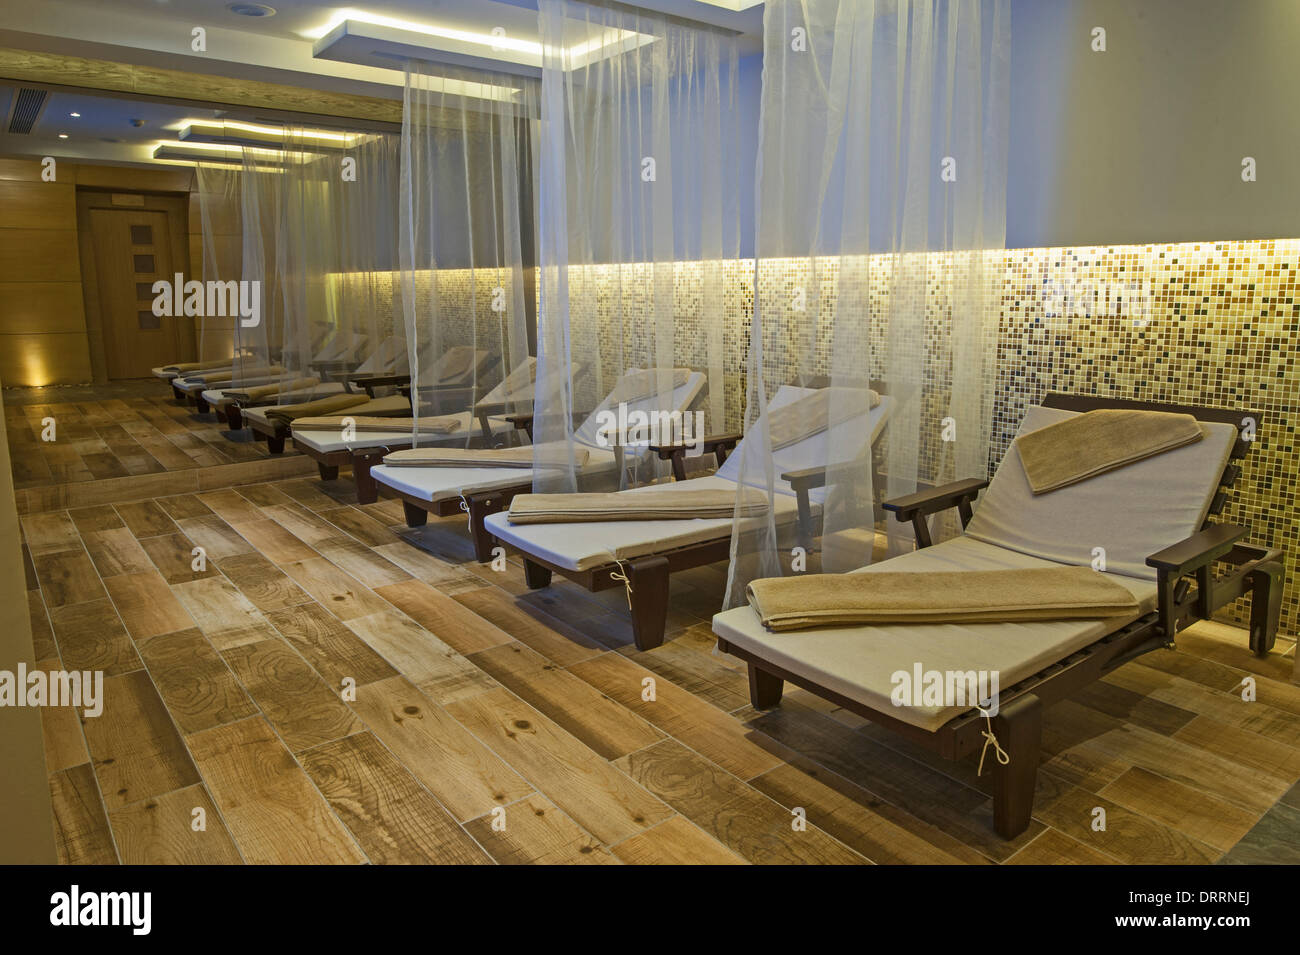 Relaxation area insode a luxury health spa with beds and towels Stock Photo